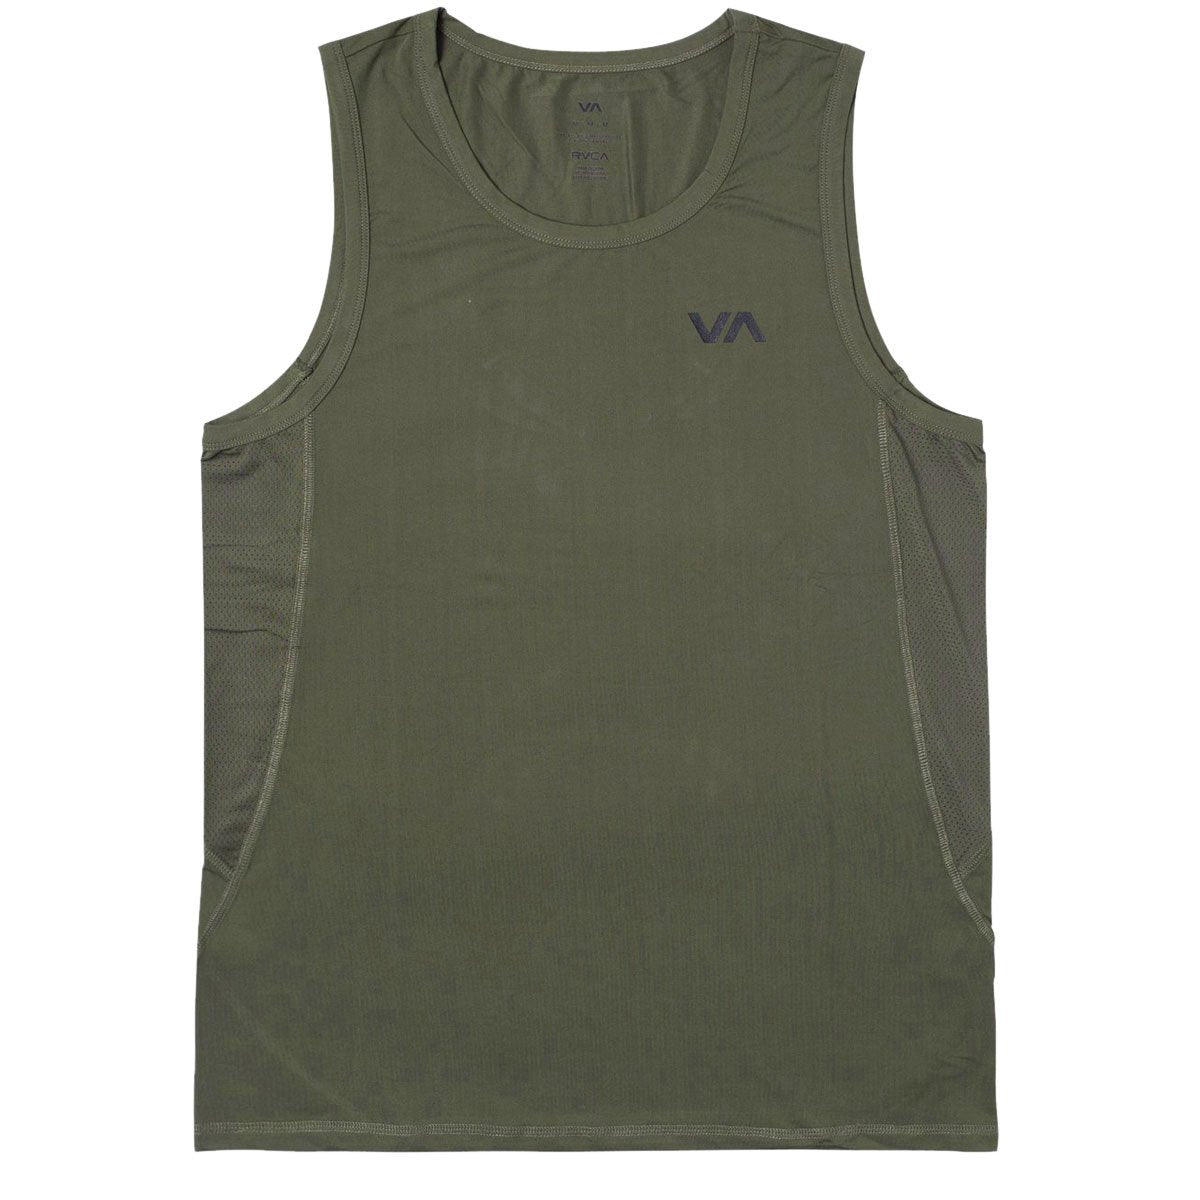 RVCA Sport Vent Sleeve Tank Top - Olive image 1